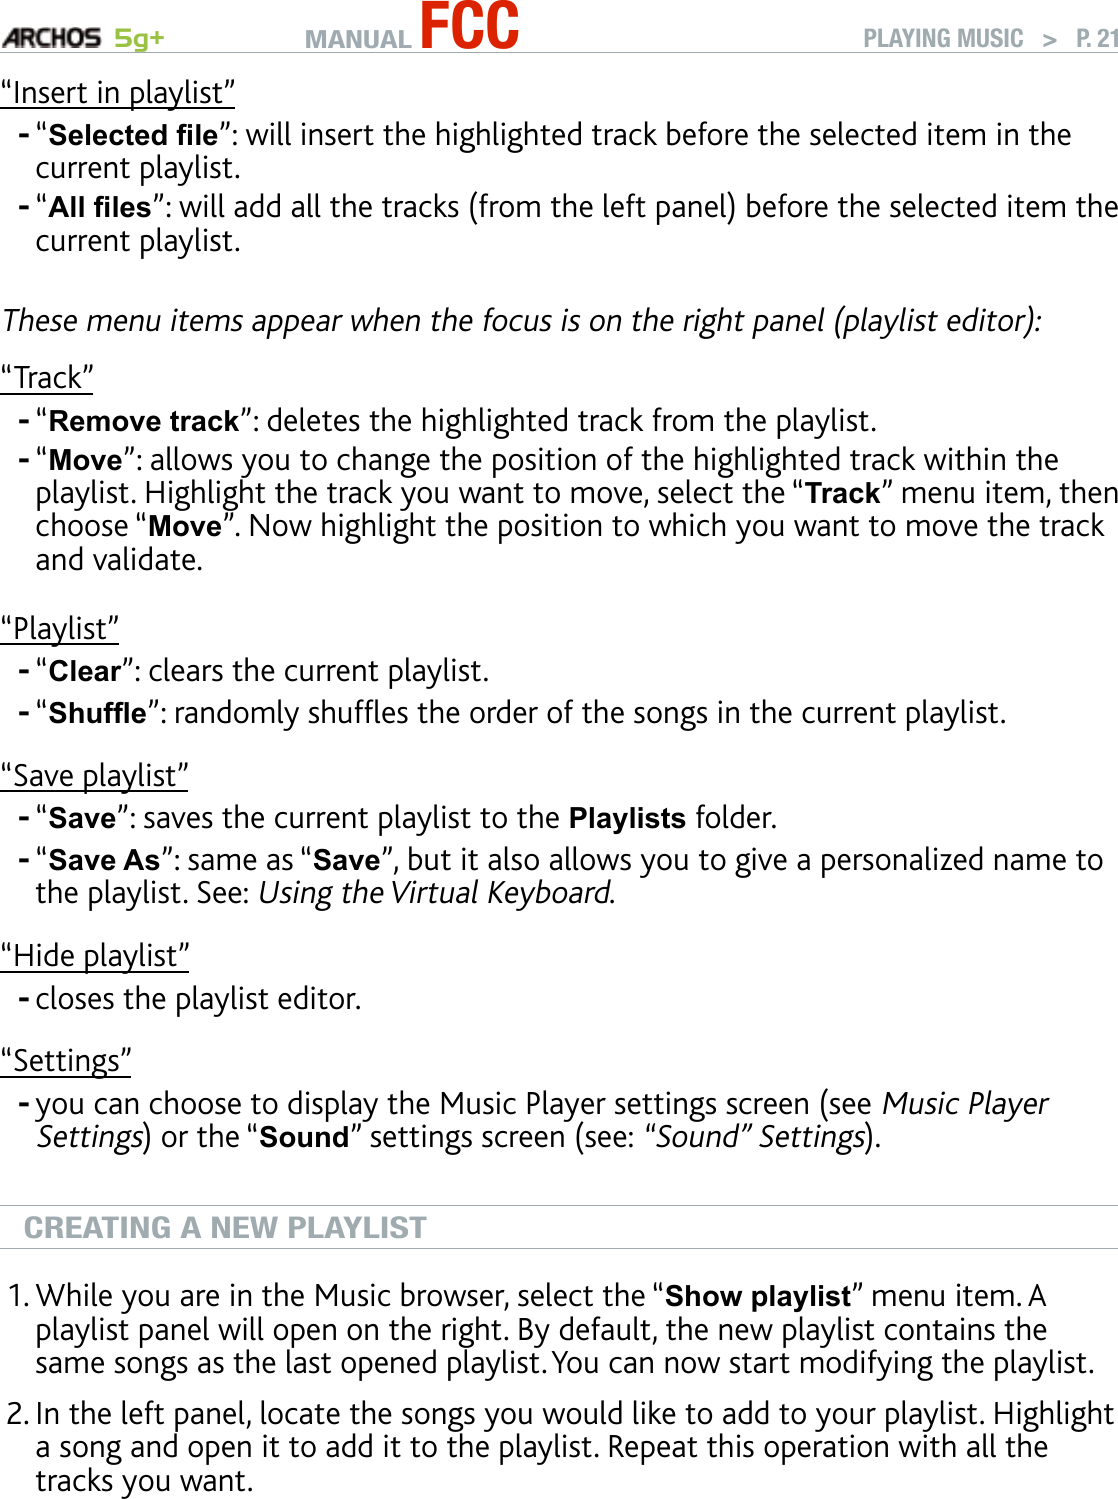 MANUAL FCC 5g+ PLAYING MUSIC   &gt;   P. 21“Insert in playlist”“Selected le”: will insert the highlighted track before the selected item in the current playlist.“All les”: will add all the tracks (from the left panel) before the selected item the current playlist.These menu items appear when the focus is on the right panel (playlist editor):“Track”“Remove track”: deletes the highlighted track from the playlist.“Move”: allows you to change the position of the highlighted track within the playlist. Highlight the track you want to move, select the “Track” menu item, then choose “Move”. Now highlight the position to which you want to move the track and validate.“Playlist”“Clear”: clears the current playlist.“Shufe”: randomly shufes the order of the songs in the current playlist.“Save playlist”“Save”: saves the current playlist to the Playlists folder.“Save As”: same as “Save”, but it also allows you to give a personalized name to the playlist. See: Using the Virtual Keyboard.“Hide playlist”closes the playlist editor.“Settings”you can choose to display the Music Player settings screen (see Music Player Settings) or the “Sound” settings screen (see: “Sound” Settings).CREATING A NEW PLAYLISTWhile you are in the Music browser, select the “Show playlist” menu item. A playlist panel will open on the right. By default, the new playlist contains the same songs as the last opened playlist. You can now start modifying the playlist.In the left panel, locate the songs you would like to add to your playlist. Highlight a song and open it to add it to the playlist. Repeat this operation with all the tracks you want. To add all the songs of a folder to a playlist: open the folder in the left panel and highlight the rst song. Then use the “Add to playlist” or “Insert in playl-ist” menu item and choose “All les”.----------1.2.